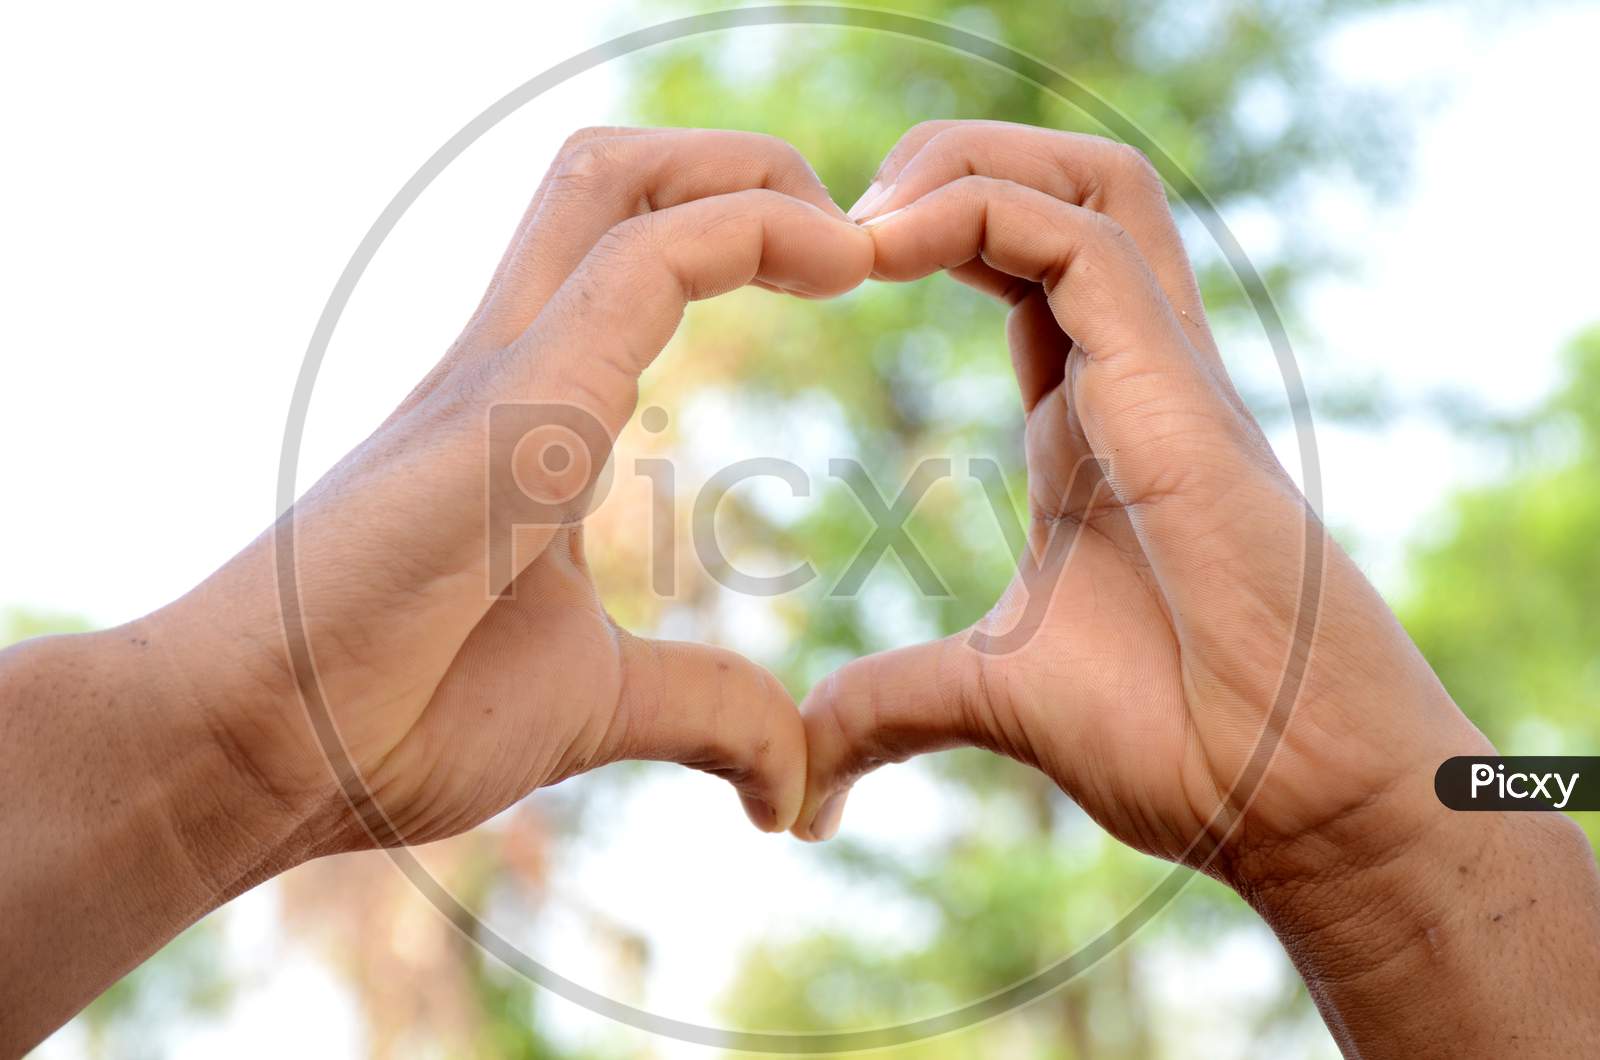 Heart Shape Hands Mental Awareness Health Concept Focus On The Green Background.